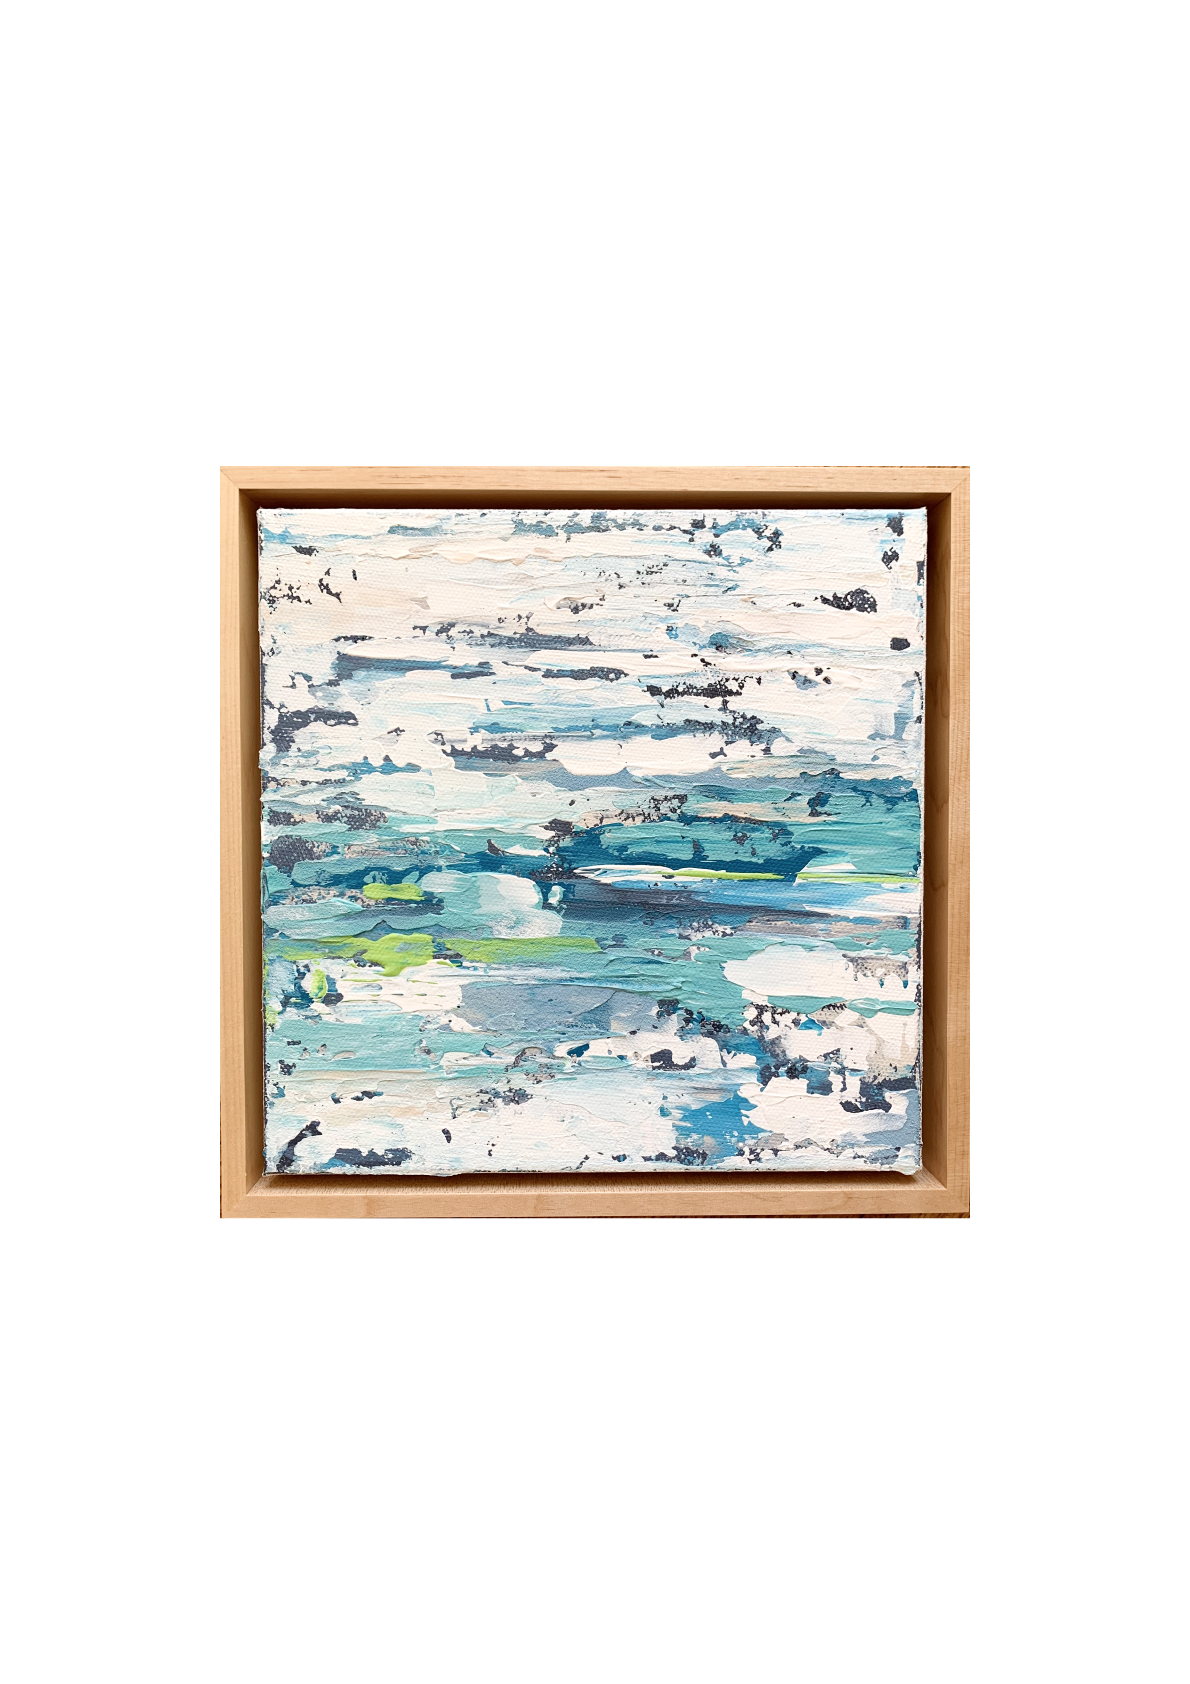 Wedgwood Framed Abstract Art Painting by Ariane Callender